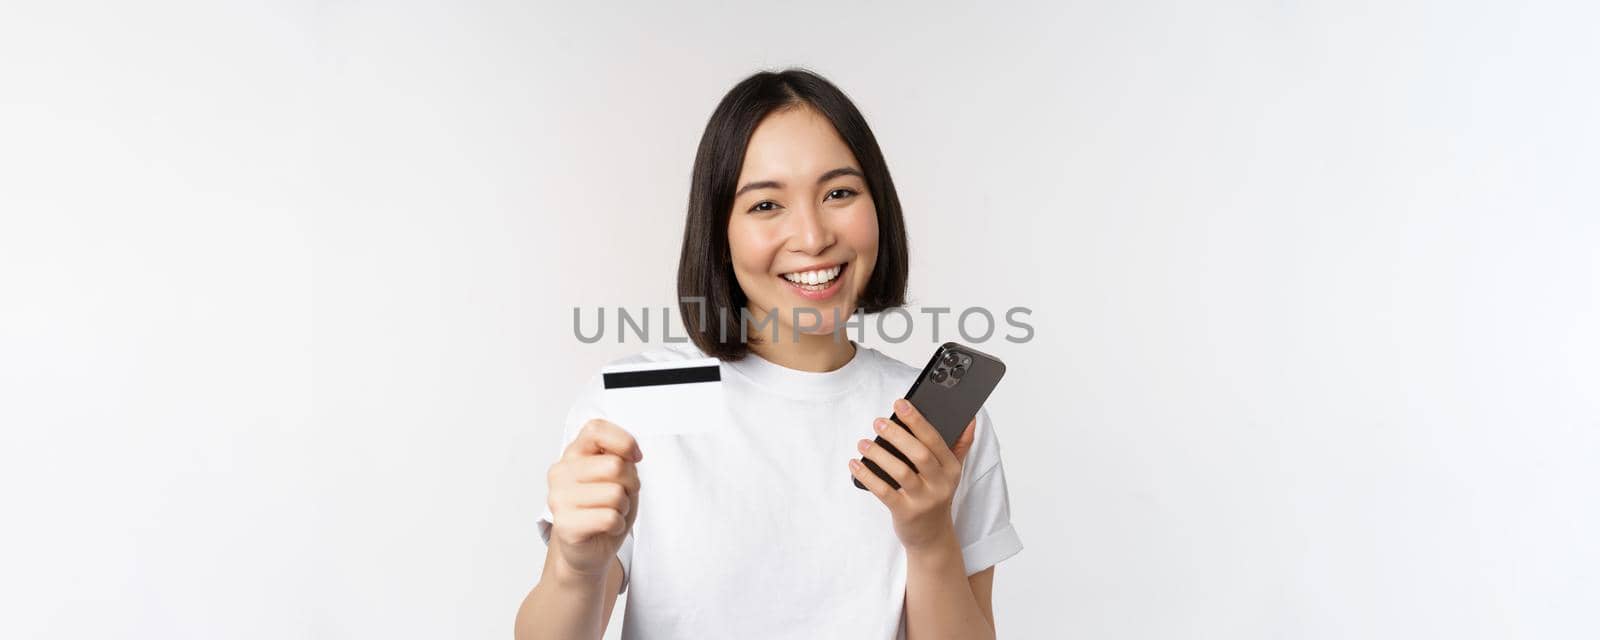 Smiling asian girl using mobile phone, showing credit card, concept of contactless payment, online shopping, standing over white background.